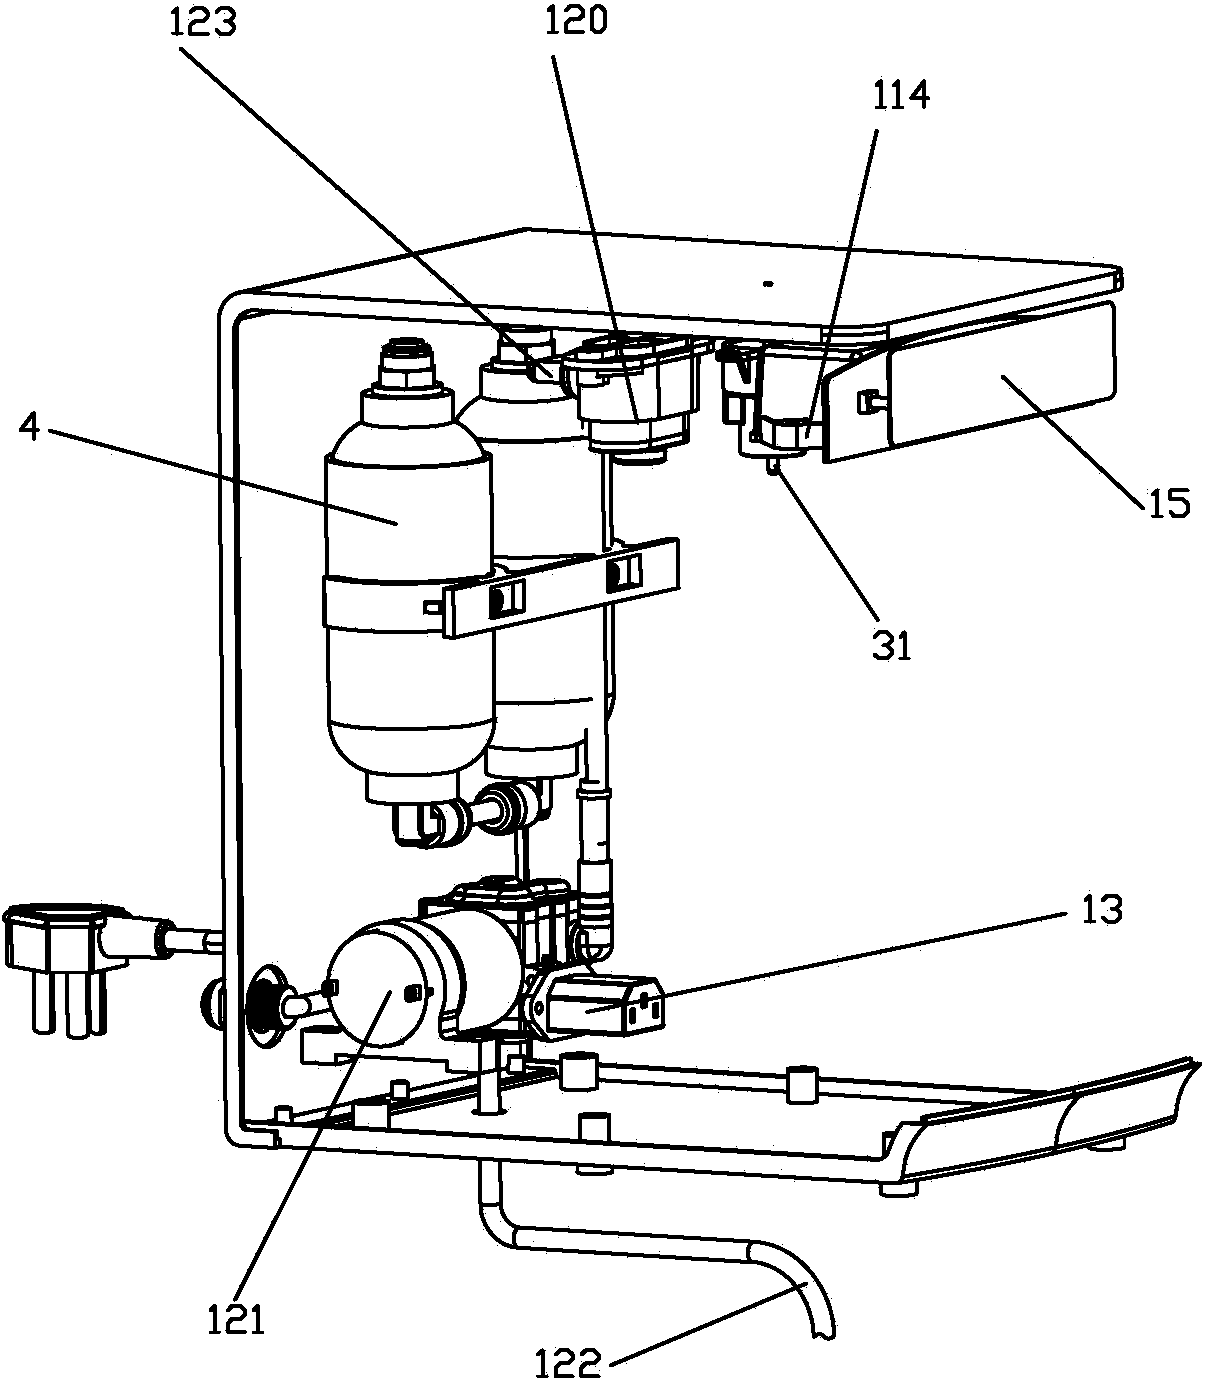 Electric water heating device capable of automatically adding water